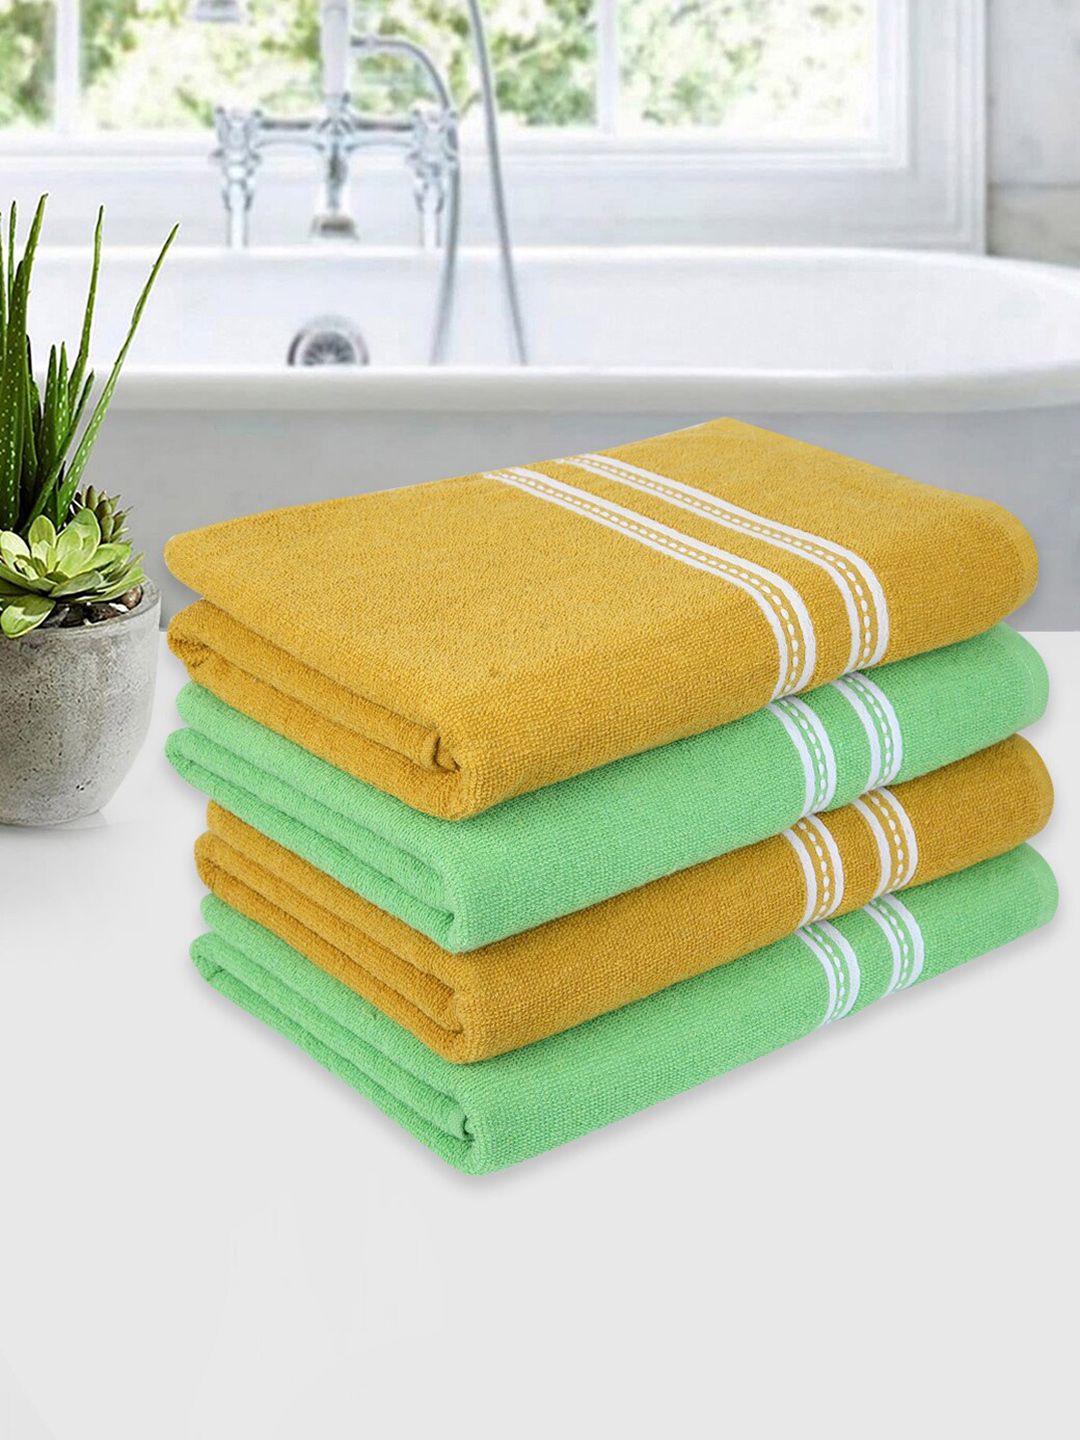 ROMEE Set Of 4 Yellow & Green Solid 500 GSM Cotton Bath Towels Price in India